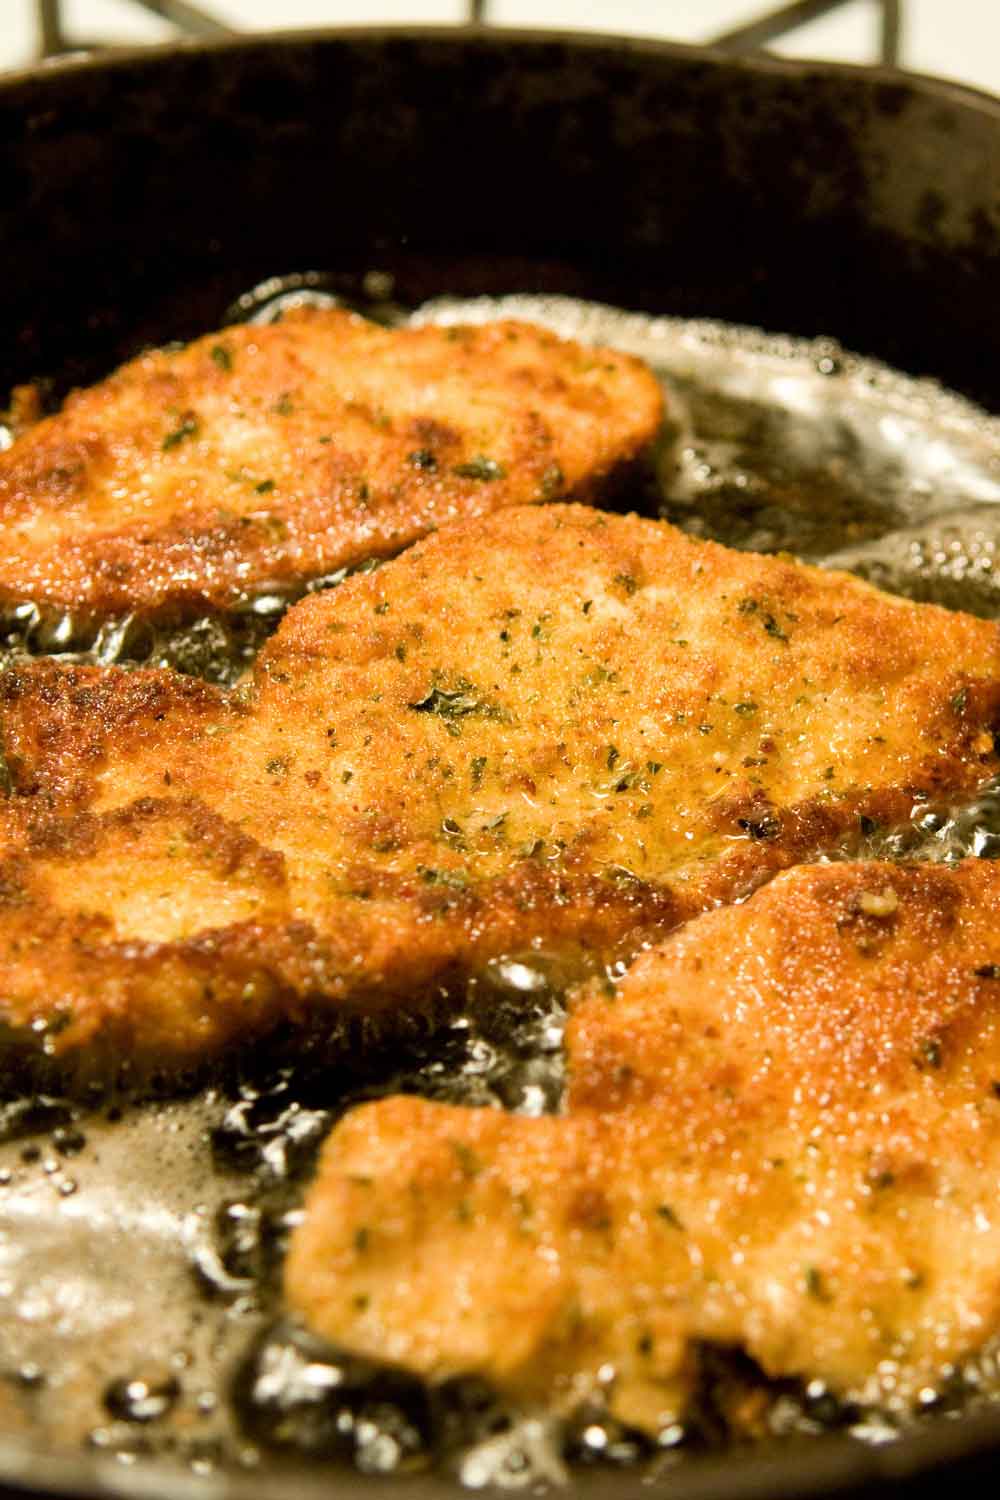 Spiced Grit-Fried Chicken Cutlets